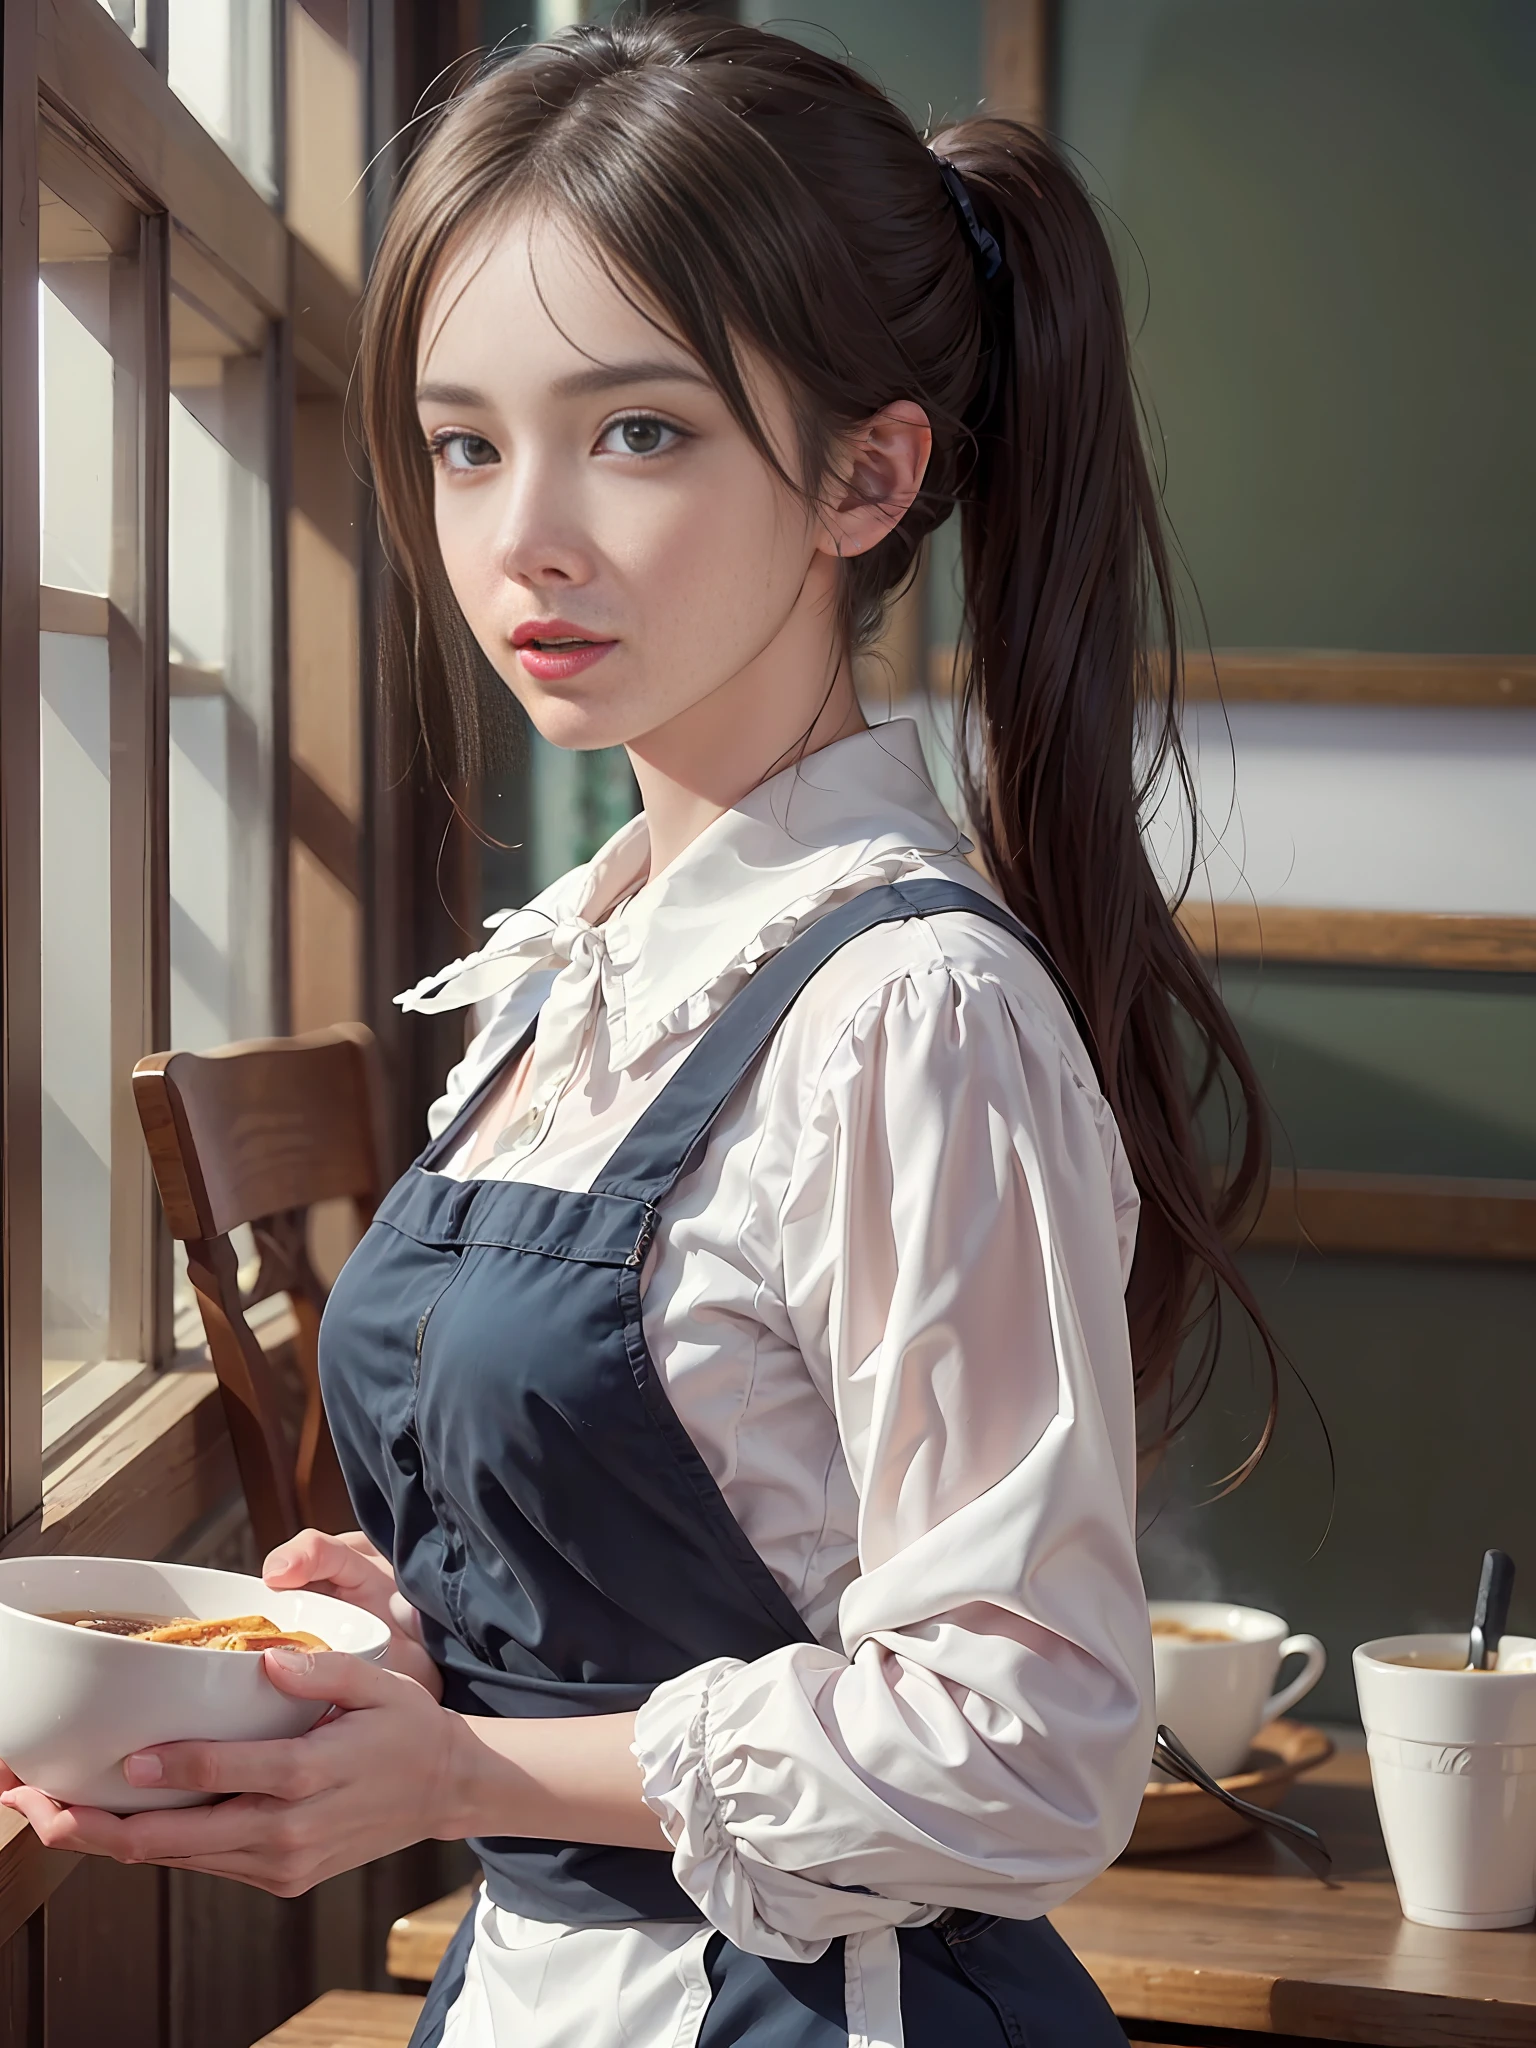 mature barista woman, (masterpiece: 1.3), (8k, photorealistic, RAW photos, best quality: 1.4), (1girl), shallow depth of field, focused face, soft focus, beautiful face, pearl pink shiny lips, (backlight: 1.5), (surroundings: 1.3), (realistic face), (black hair, medium short: 1.3), Loose wavy hair, Short bangs, Ponytail, Pigtails, Braids, Realistic eyes, Dark brown eyes, Pupil highlights, Beautiful detail eyes, Dark brown eyes, (plenty of natural light), (Realistic skin), Beautiful skin, (blouse with white collar), (apron), (carrying tray), absurd, attractive, ultra high resolution, ultra realistic, high resolution, golden ratio, Detailed café dining background, blackboard menu, backlight from back window, pale skylight with natural light, natural light lighting from diagonally front of face, (small head), (small), perfect anatomy